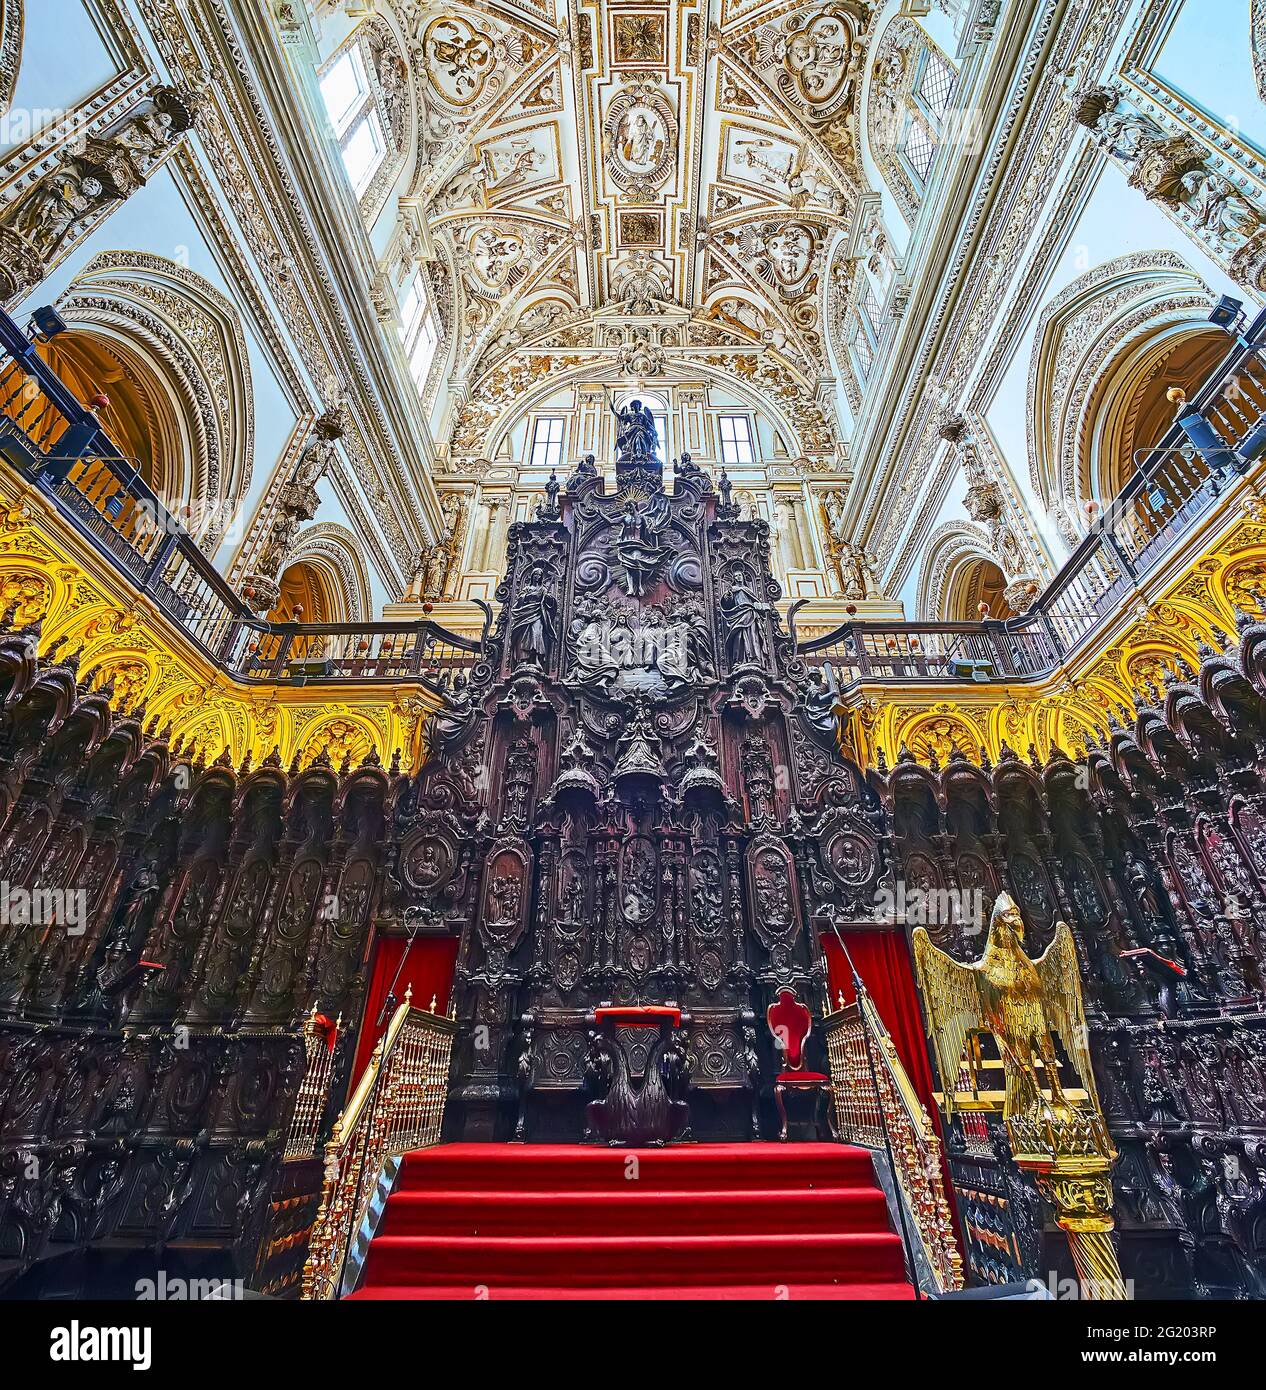 CORDOBA, SPAIN - SEP 30, 2019: The richly decorated carved wooden choir stalls in Capilla Mayor (Main Chapel) of Mezquita- Catedral, on Sep 30 in Cord Stock Photo